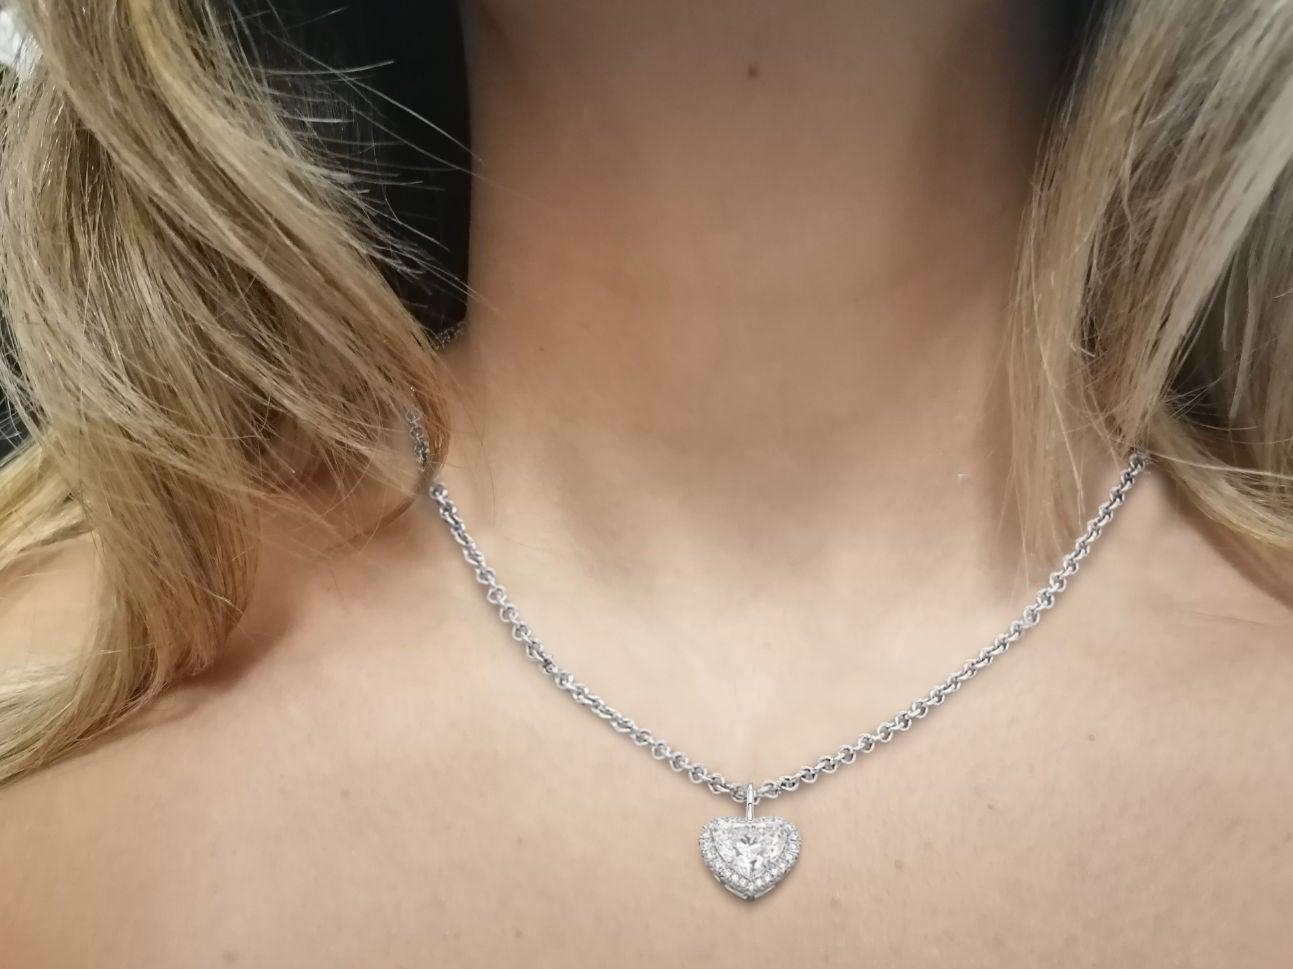 We present this magnificent pendant with a GIA certified heart shape diamond of 4.42 carats
Around this heart is a circle of round cut diamonds.
The total carat weight is approximately 4.42 carats.

The 18k white gold chain is included.